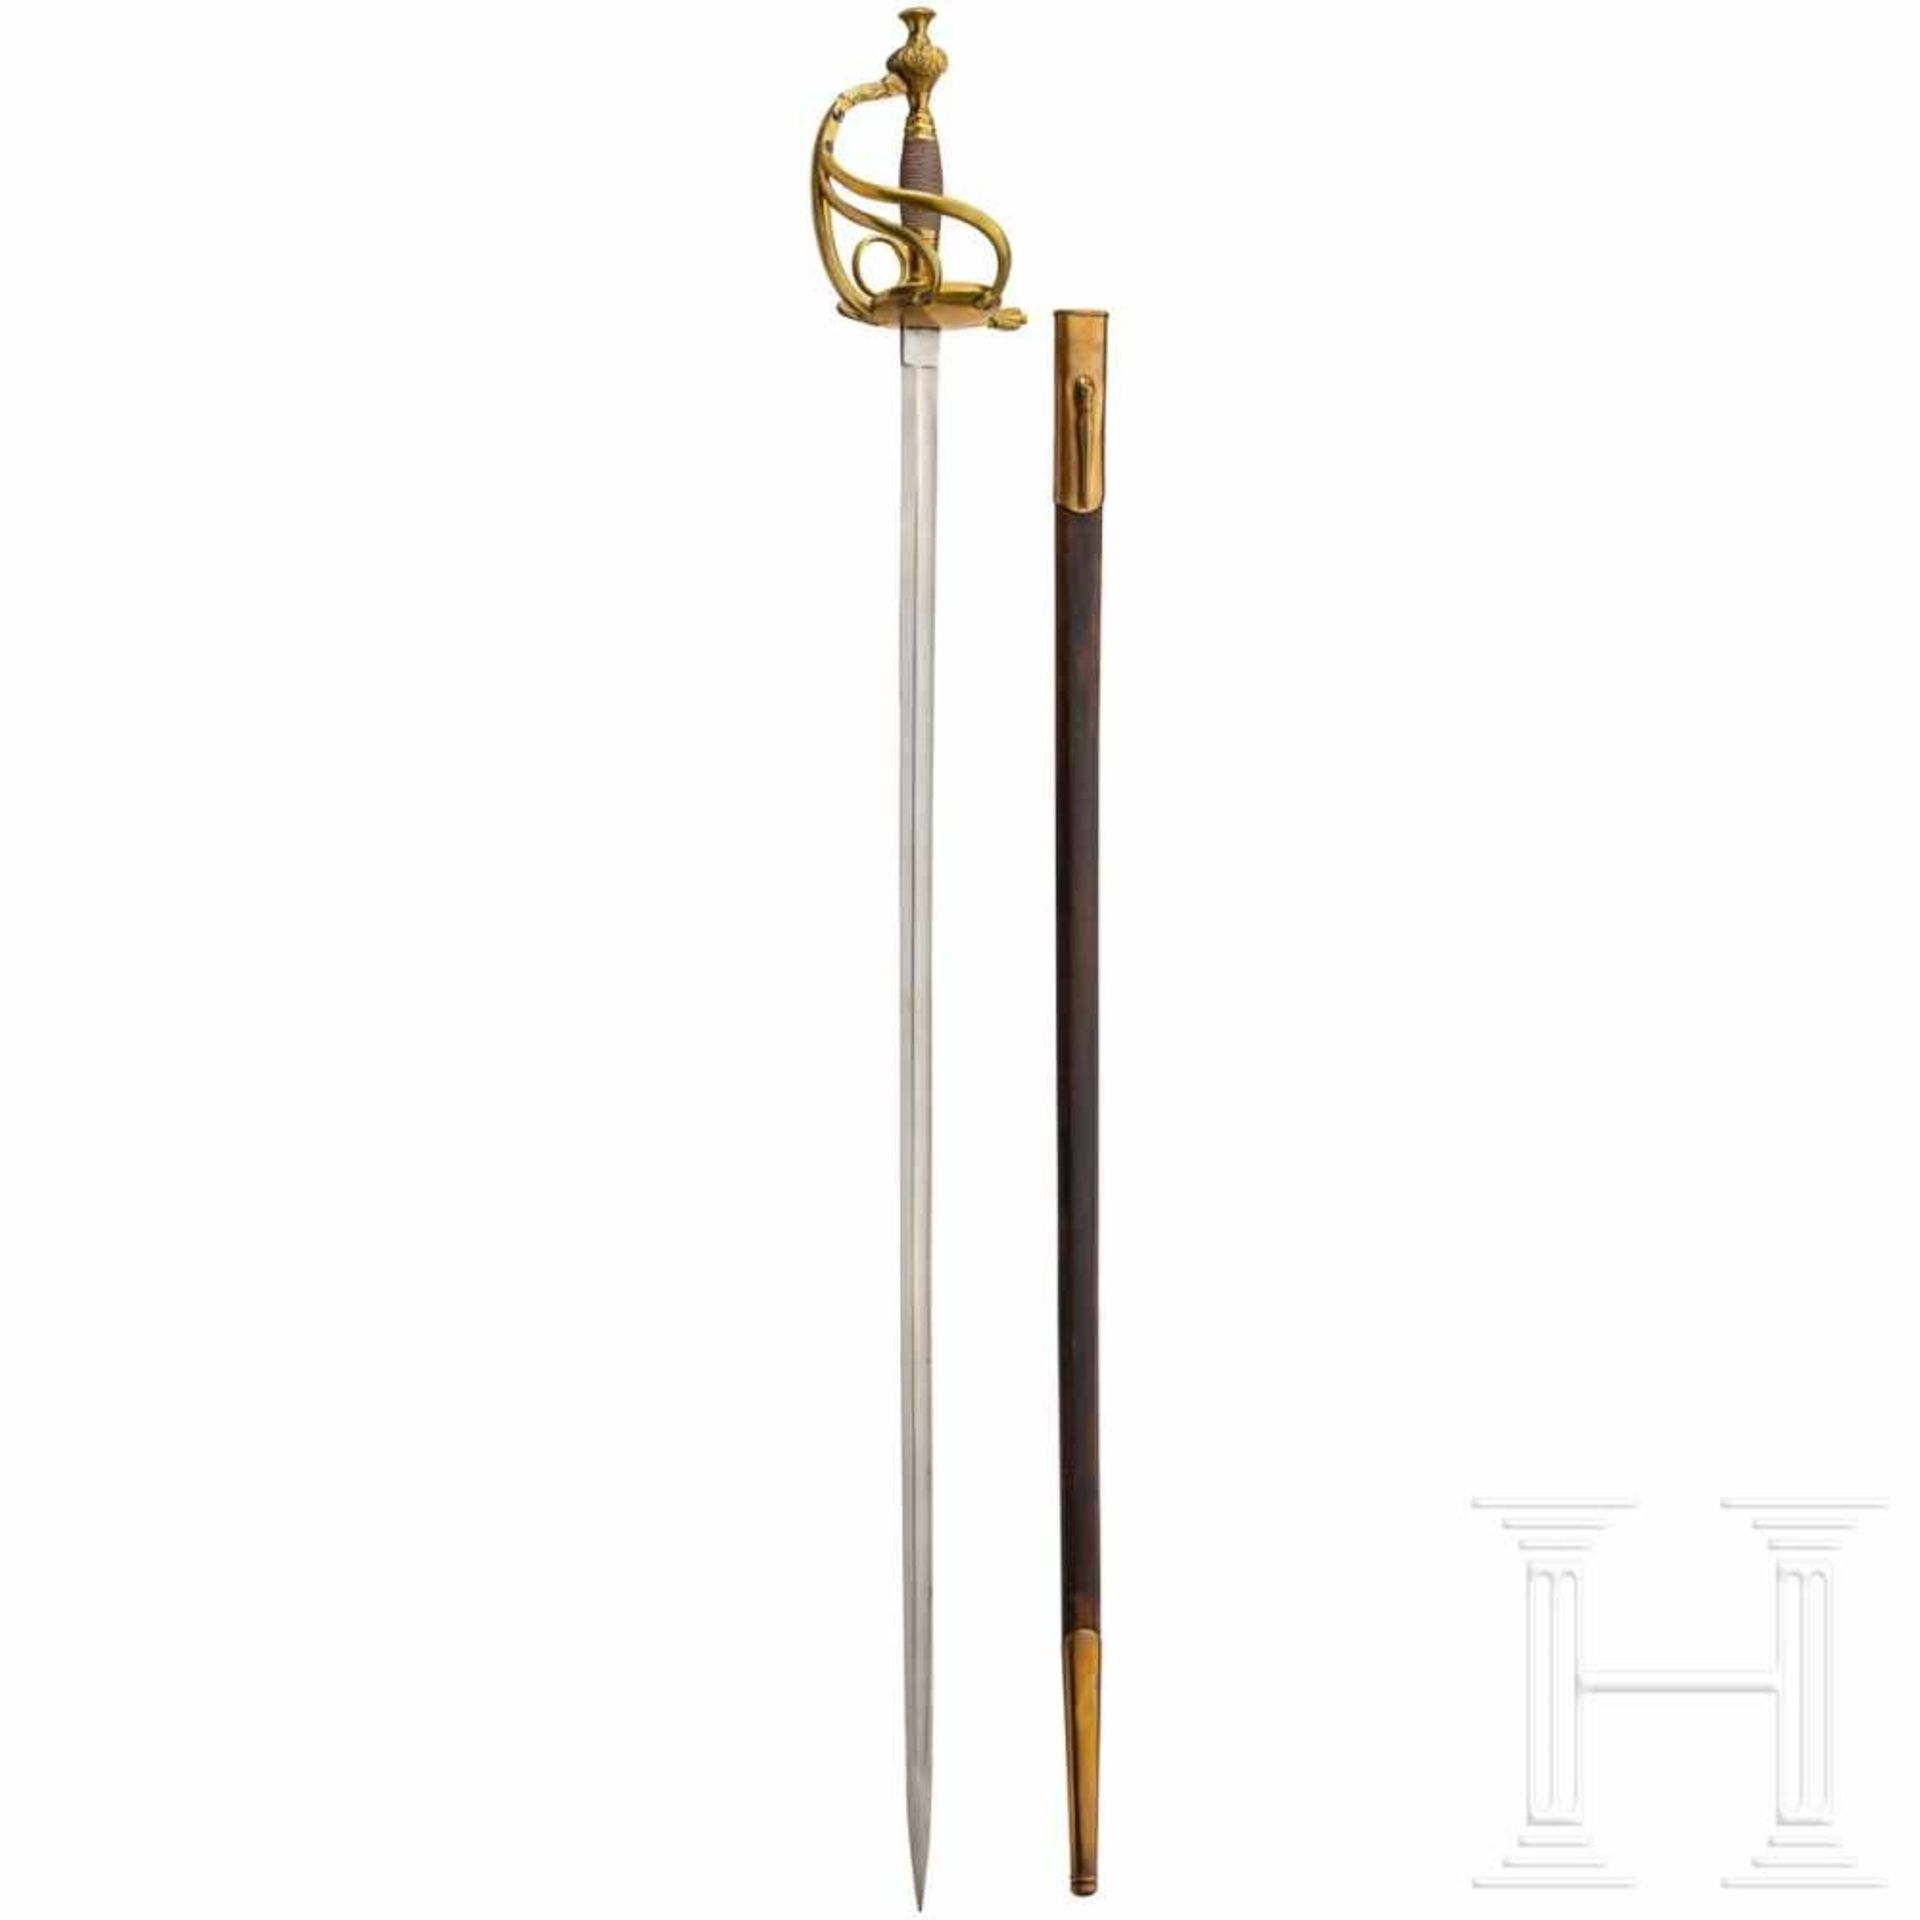 A sword for infantry officers for official trials, reign of Friedrich III.Gekehlte, gerade